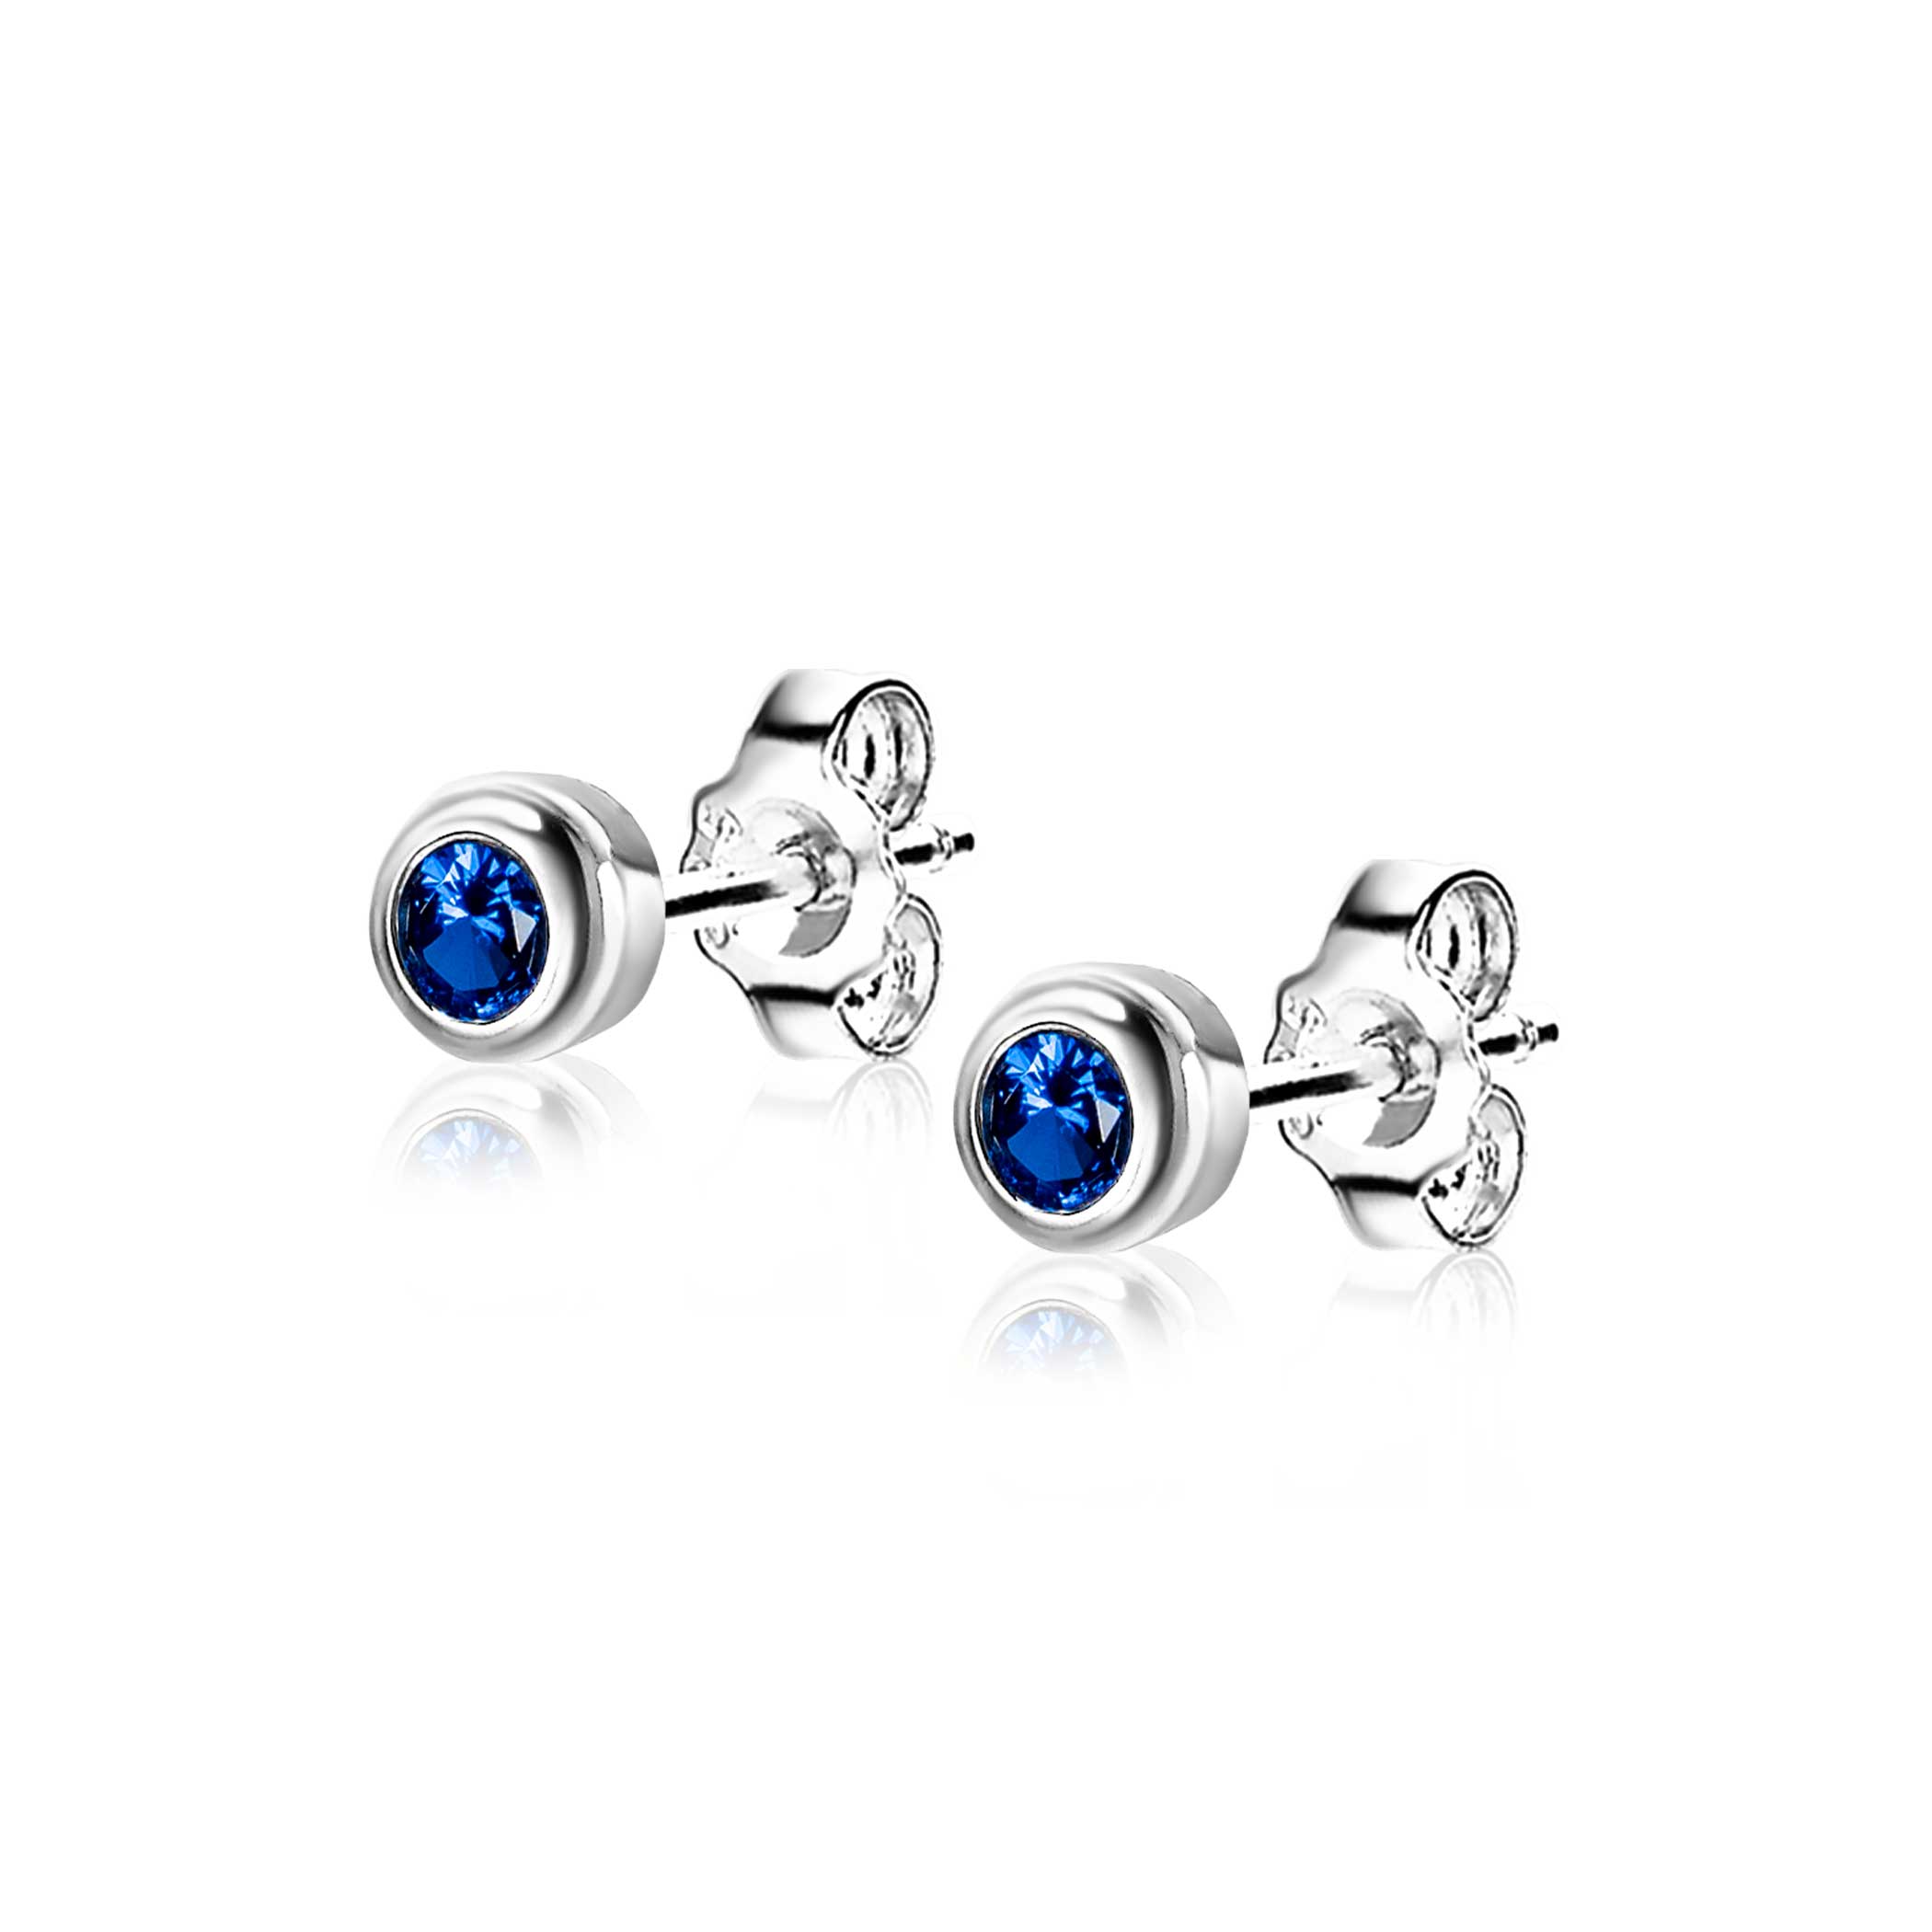 SEPTEMBER Stud Earrings 4mm Sterling Silver with Birthstone Blue Sapphire Zirconia